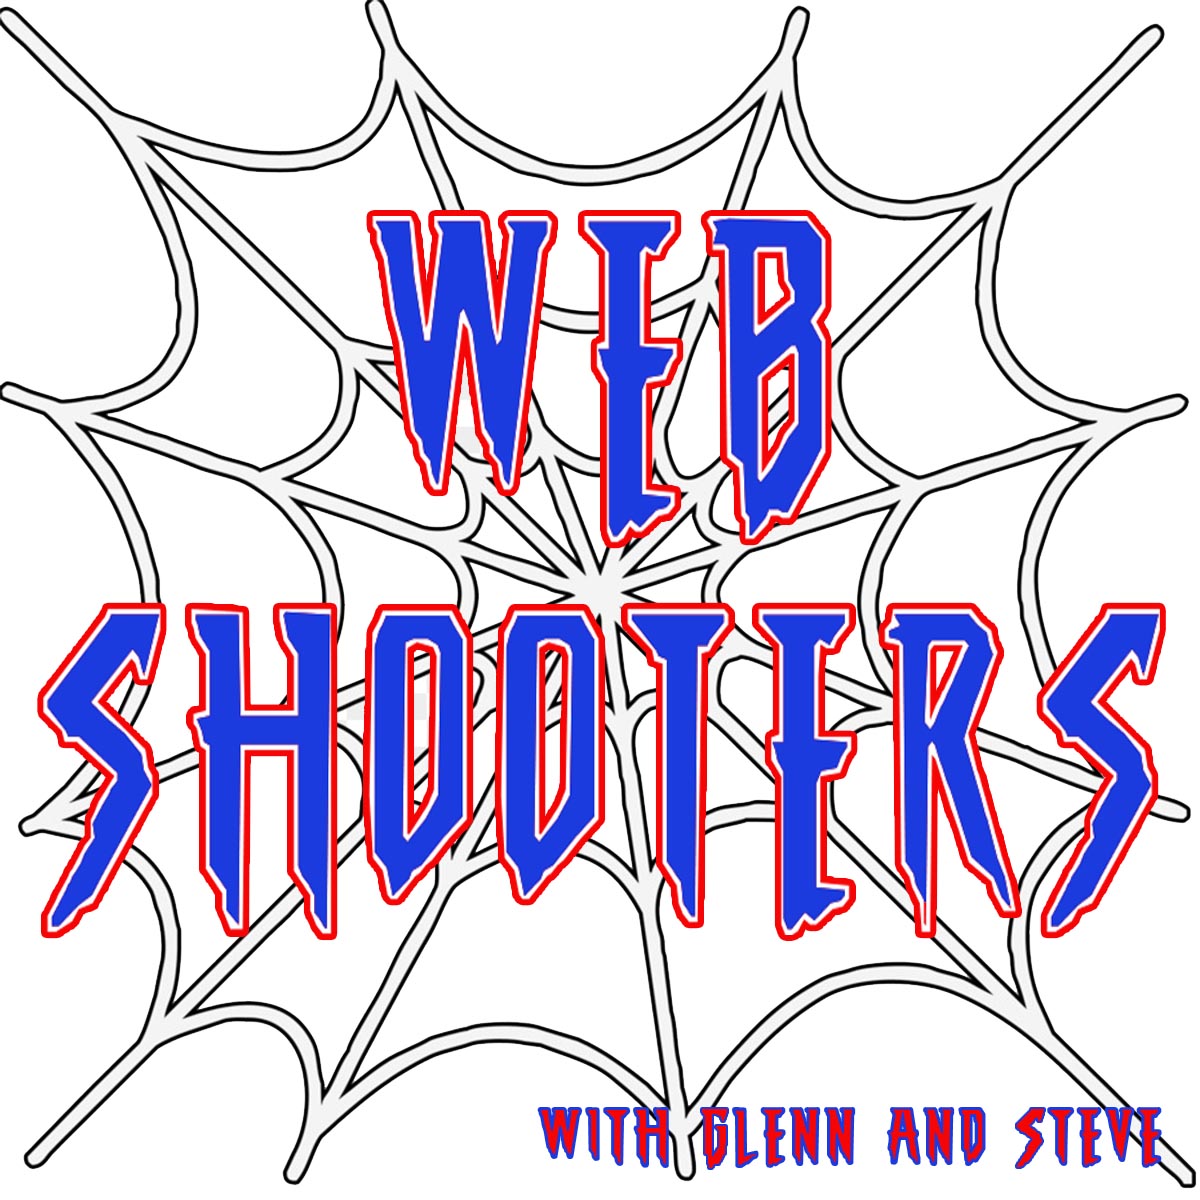 WebShooters- Spider-Man